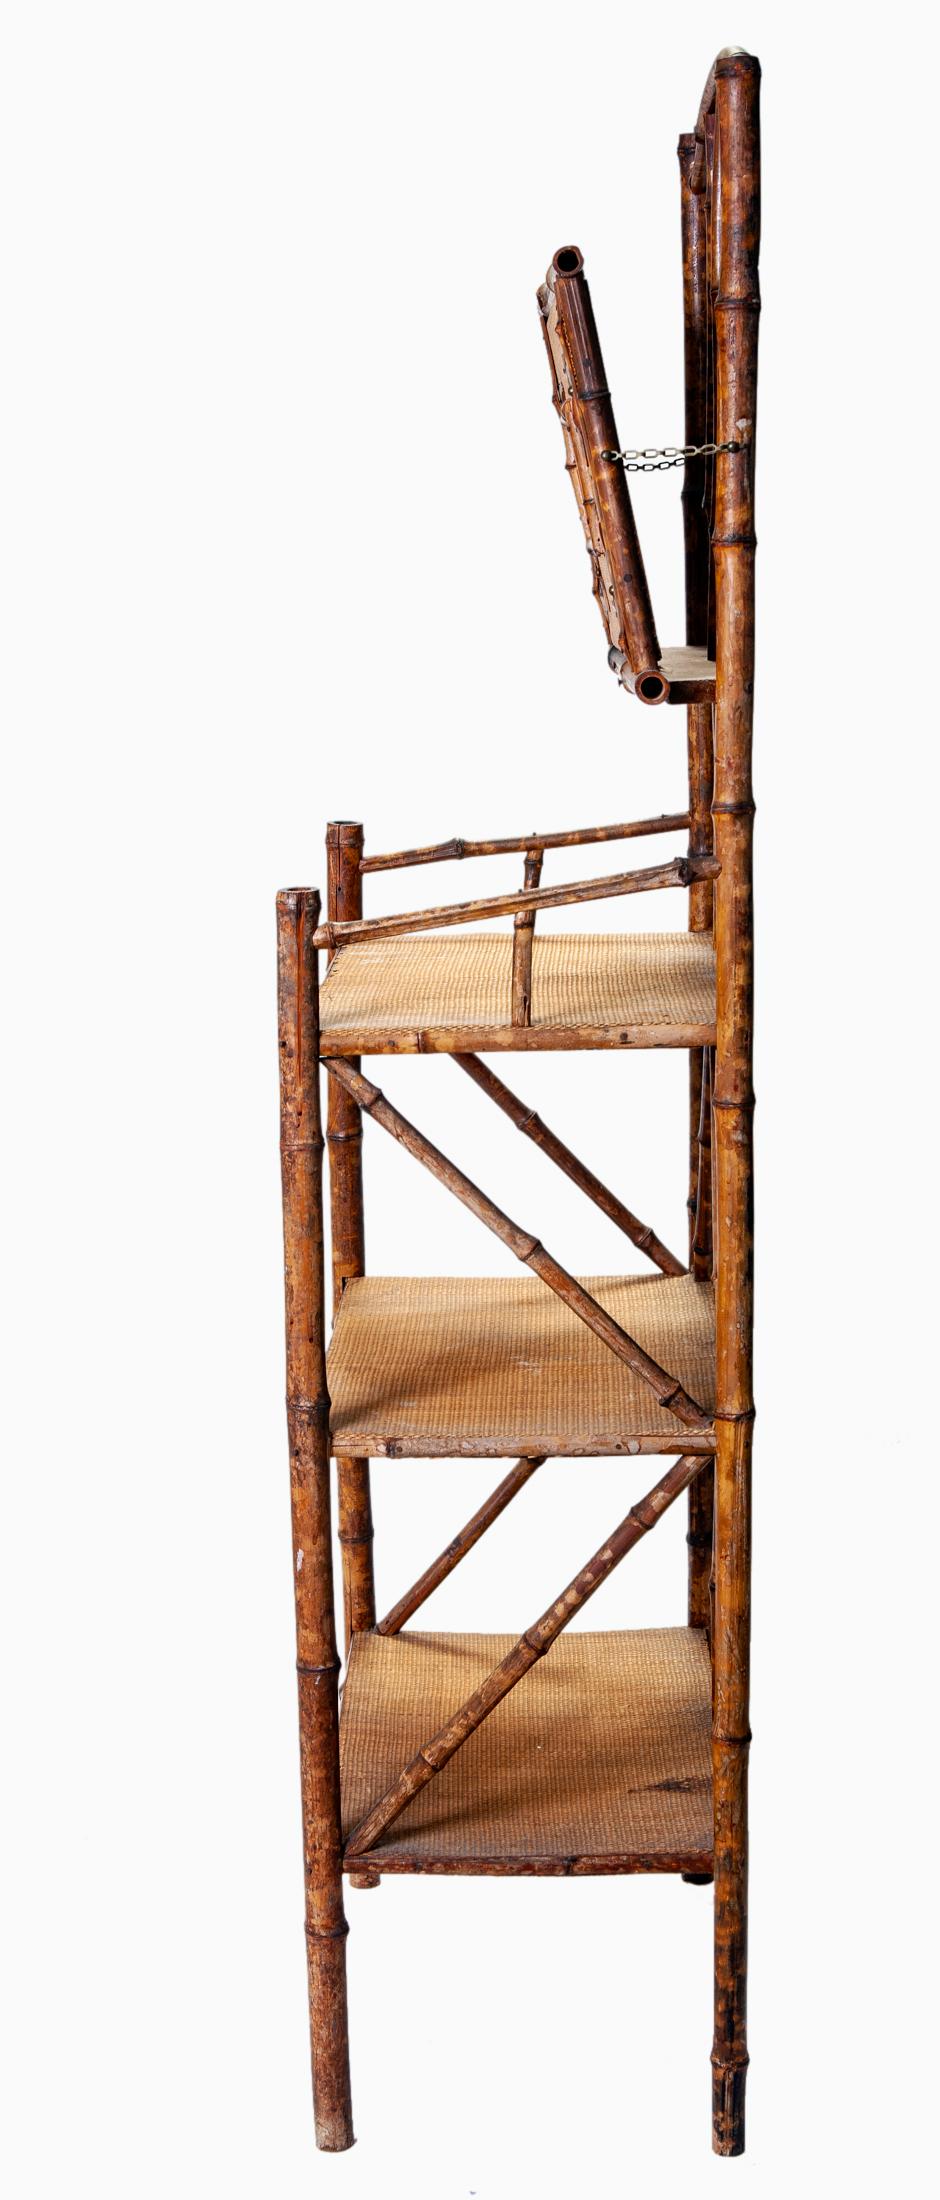 Hand-Crafted European Bamboo Etagere W 3 Shelves in Woven Fiber For Sale